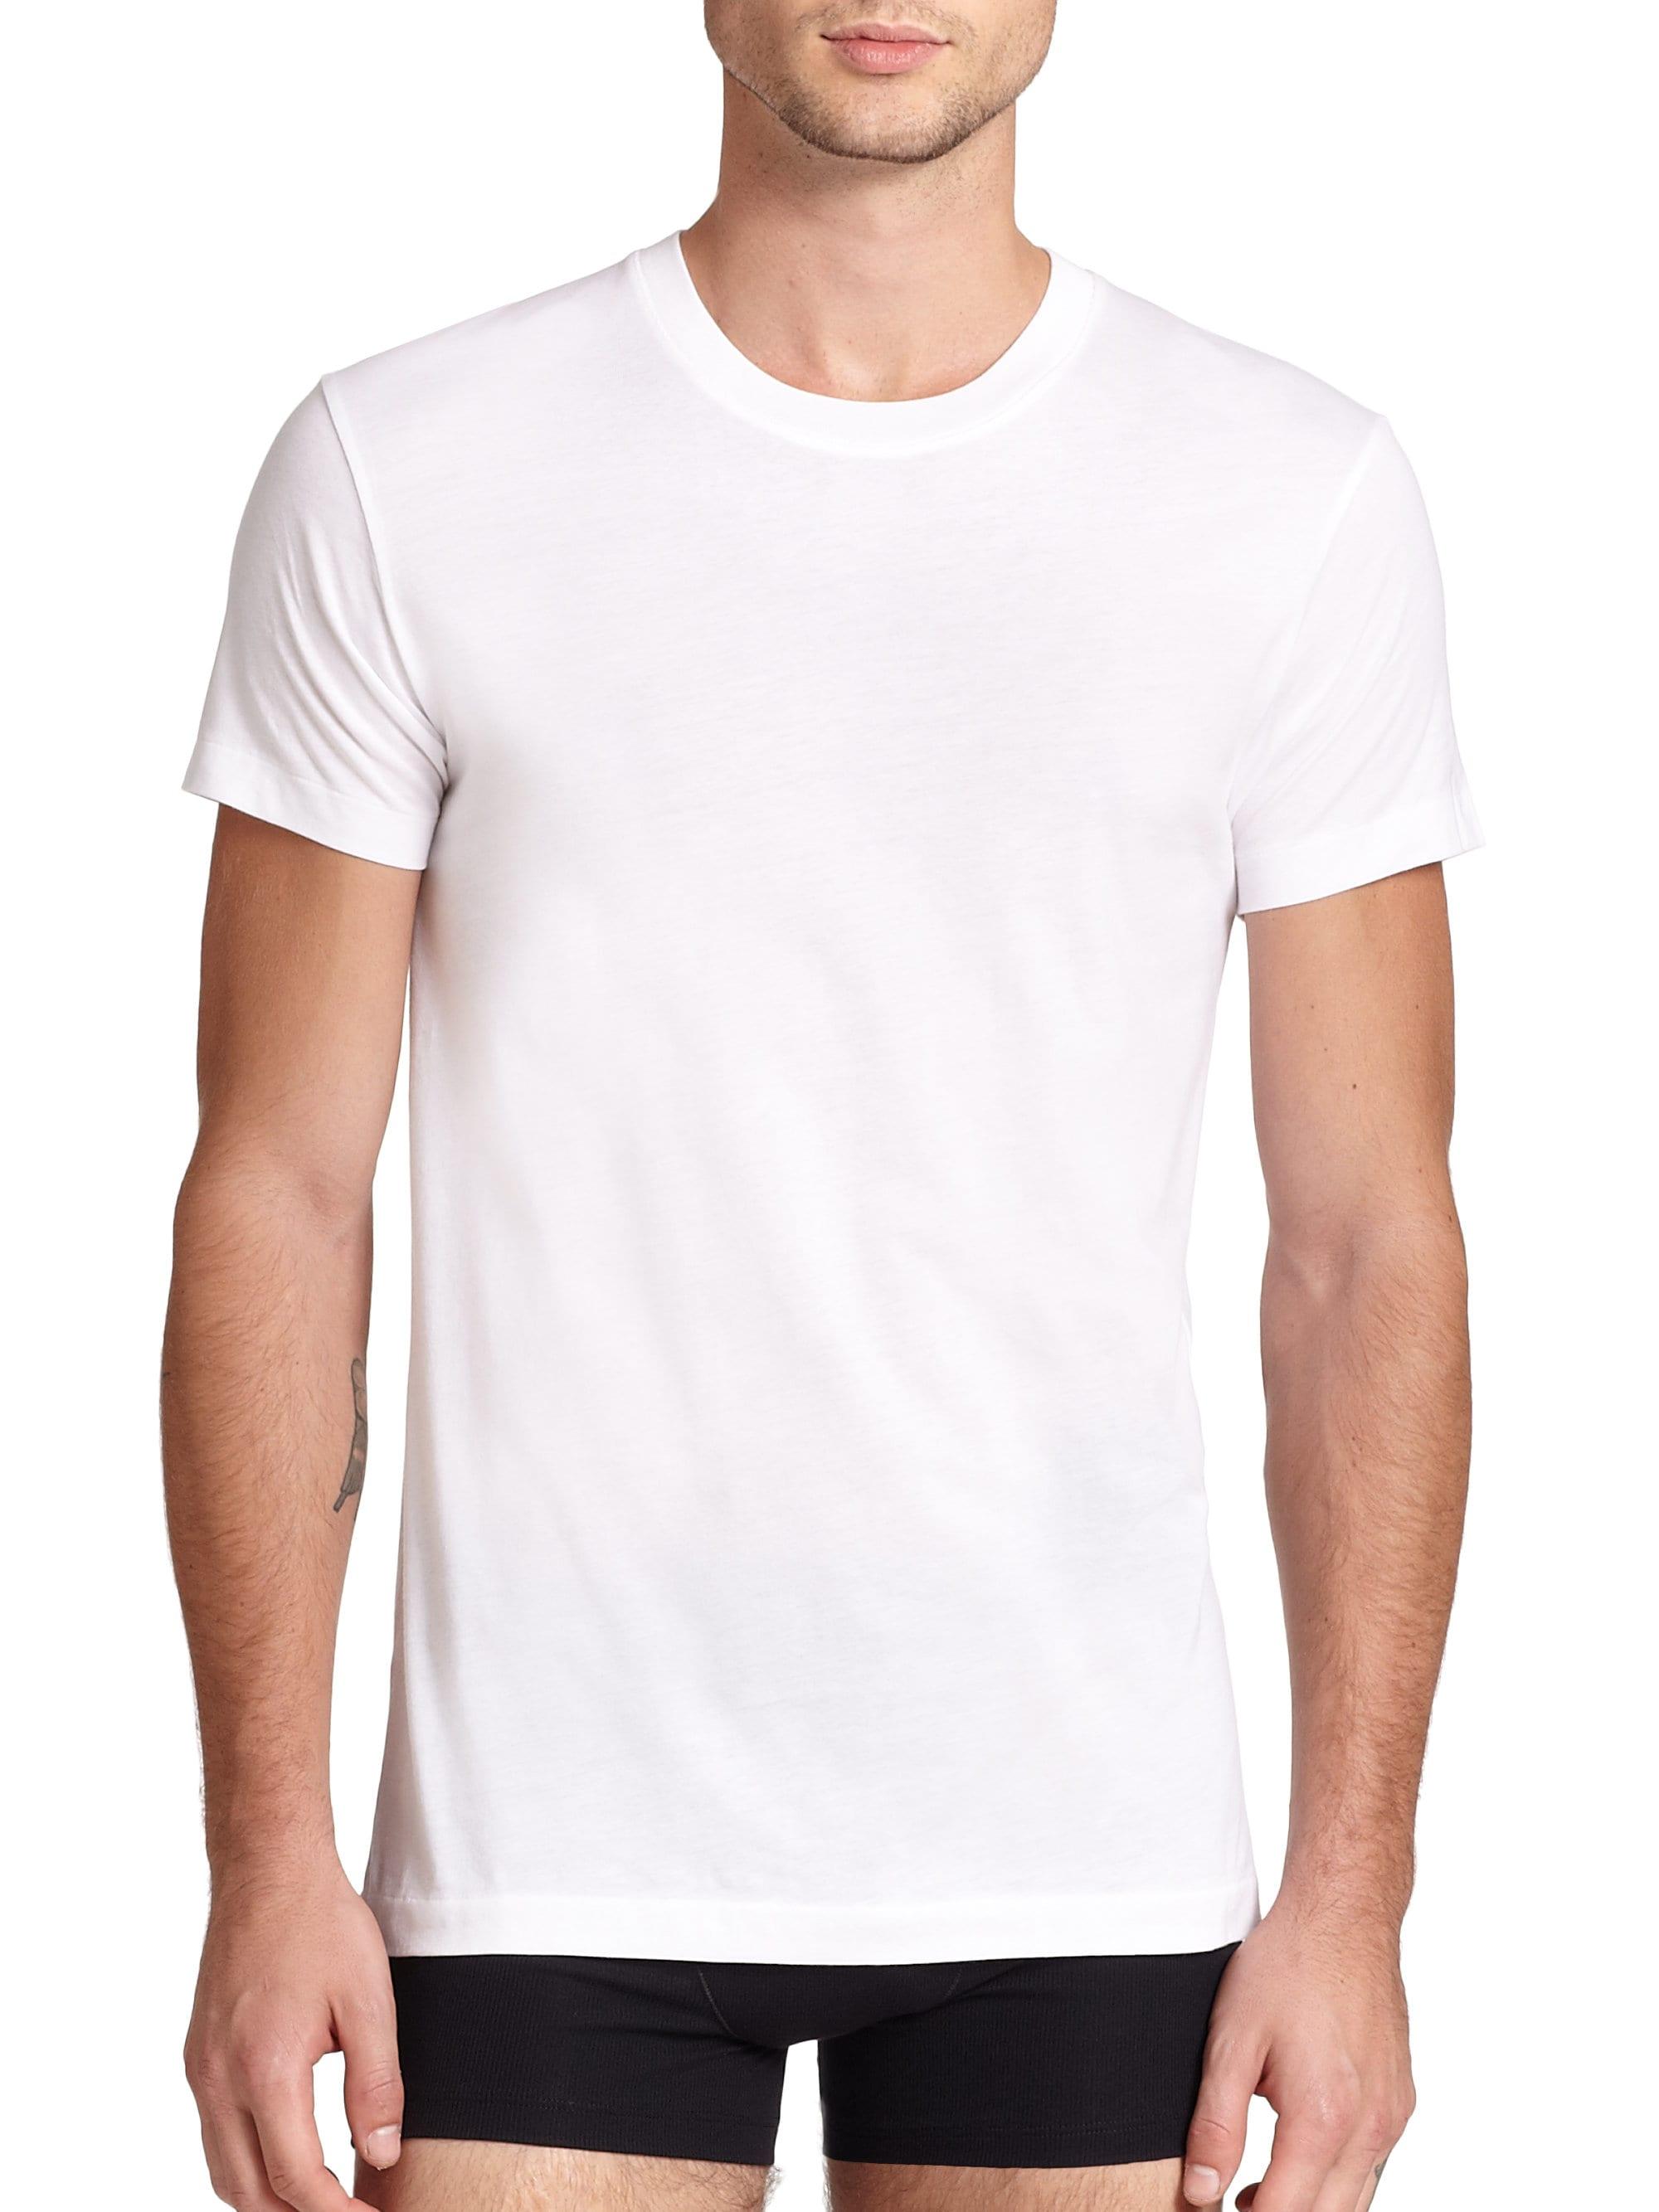 Lyst - 2xist Pima Cotton Crewneck Tee in White for Men